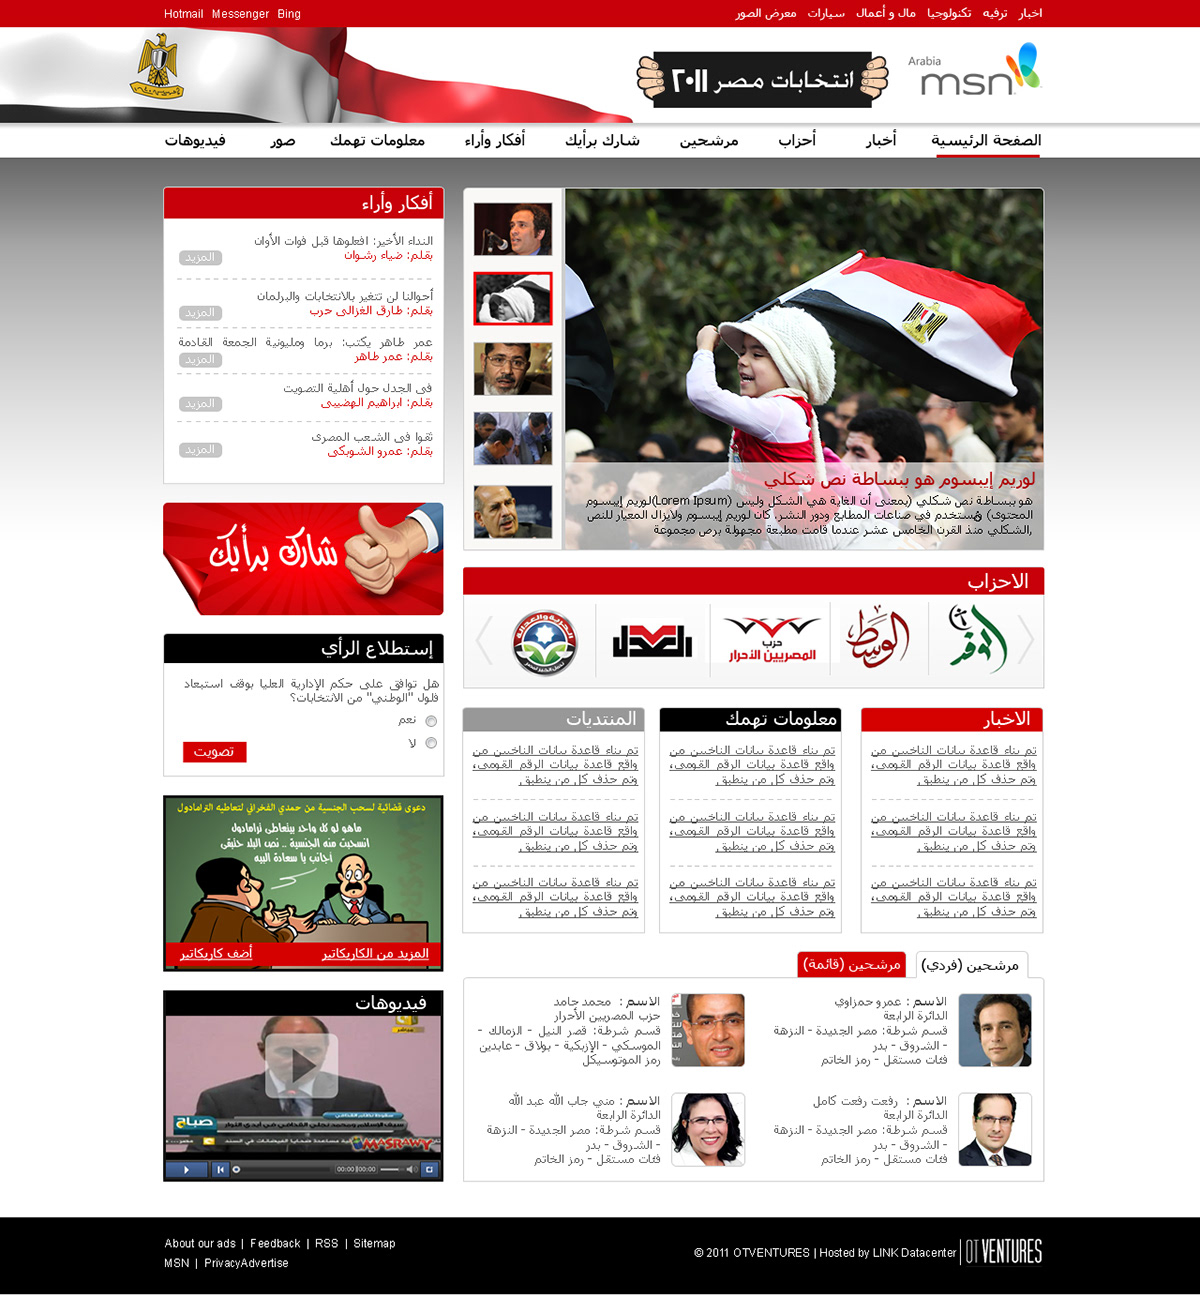 msn user interface Elections egypt elections